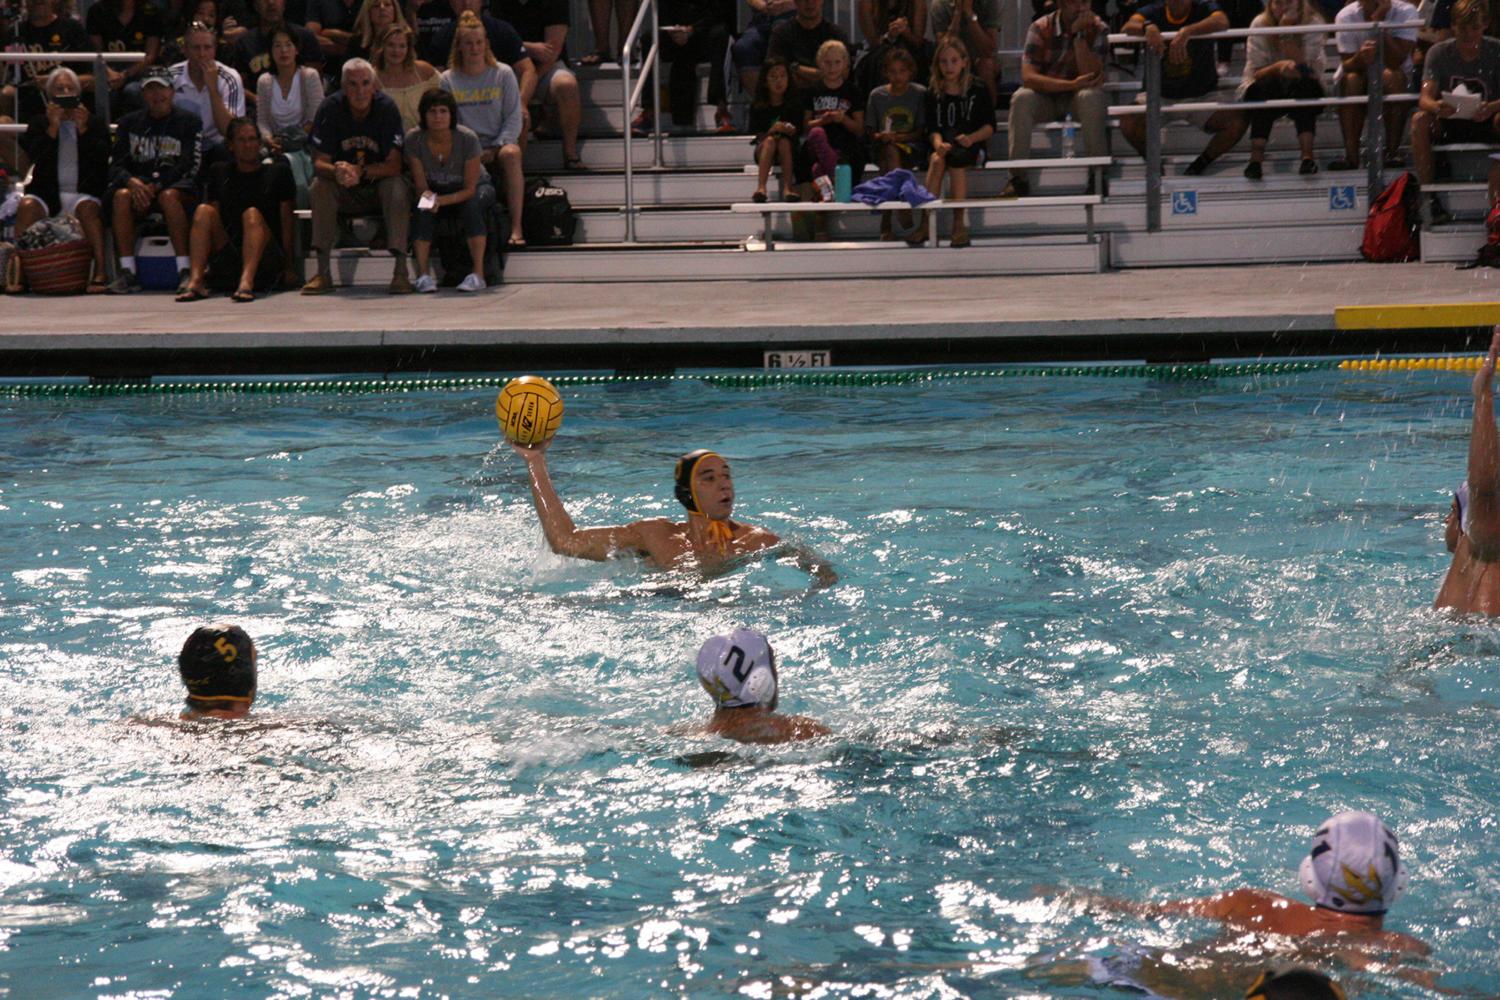 LBSU junior attacker Chandler Kaltenbach winds up for a shot at the goal in the 49er's 11-10 quadruple overtime victory.